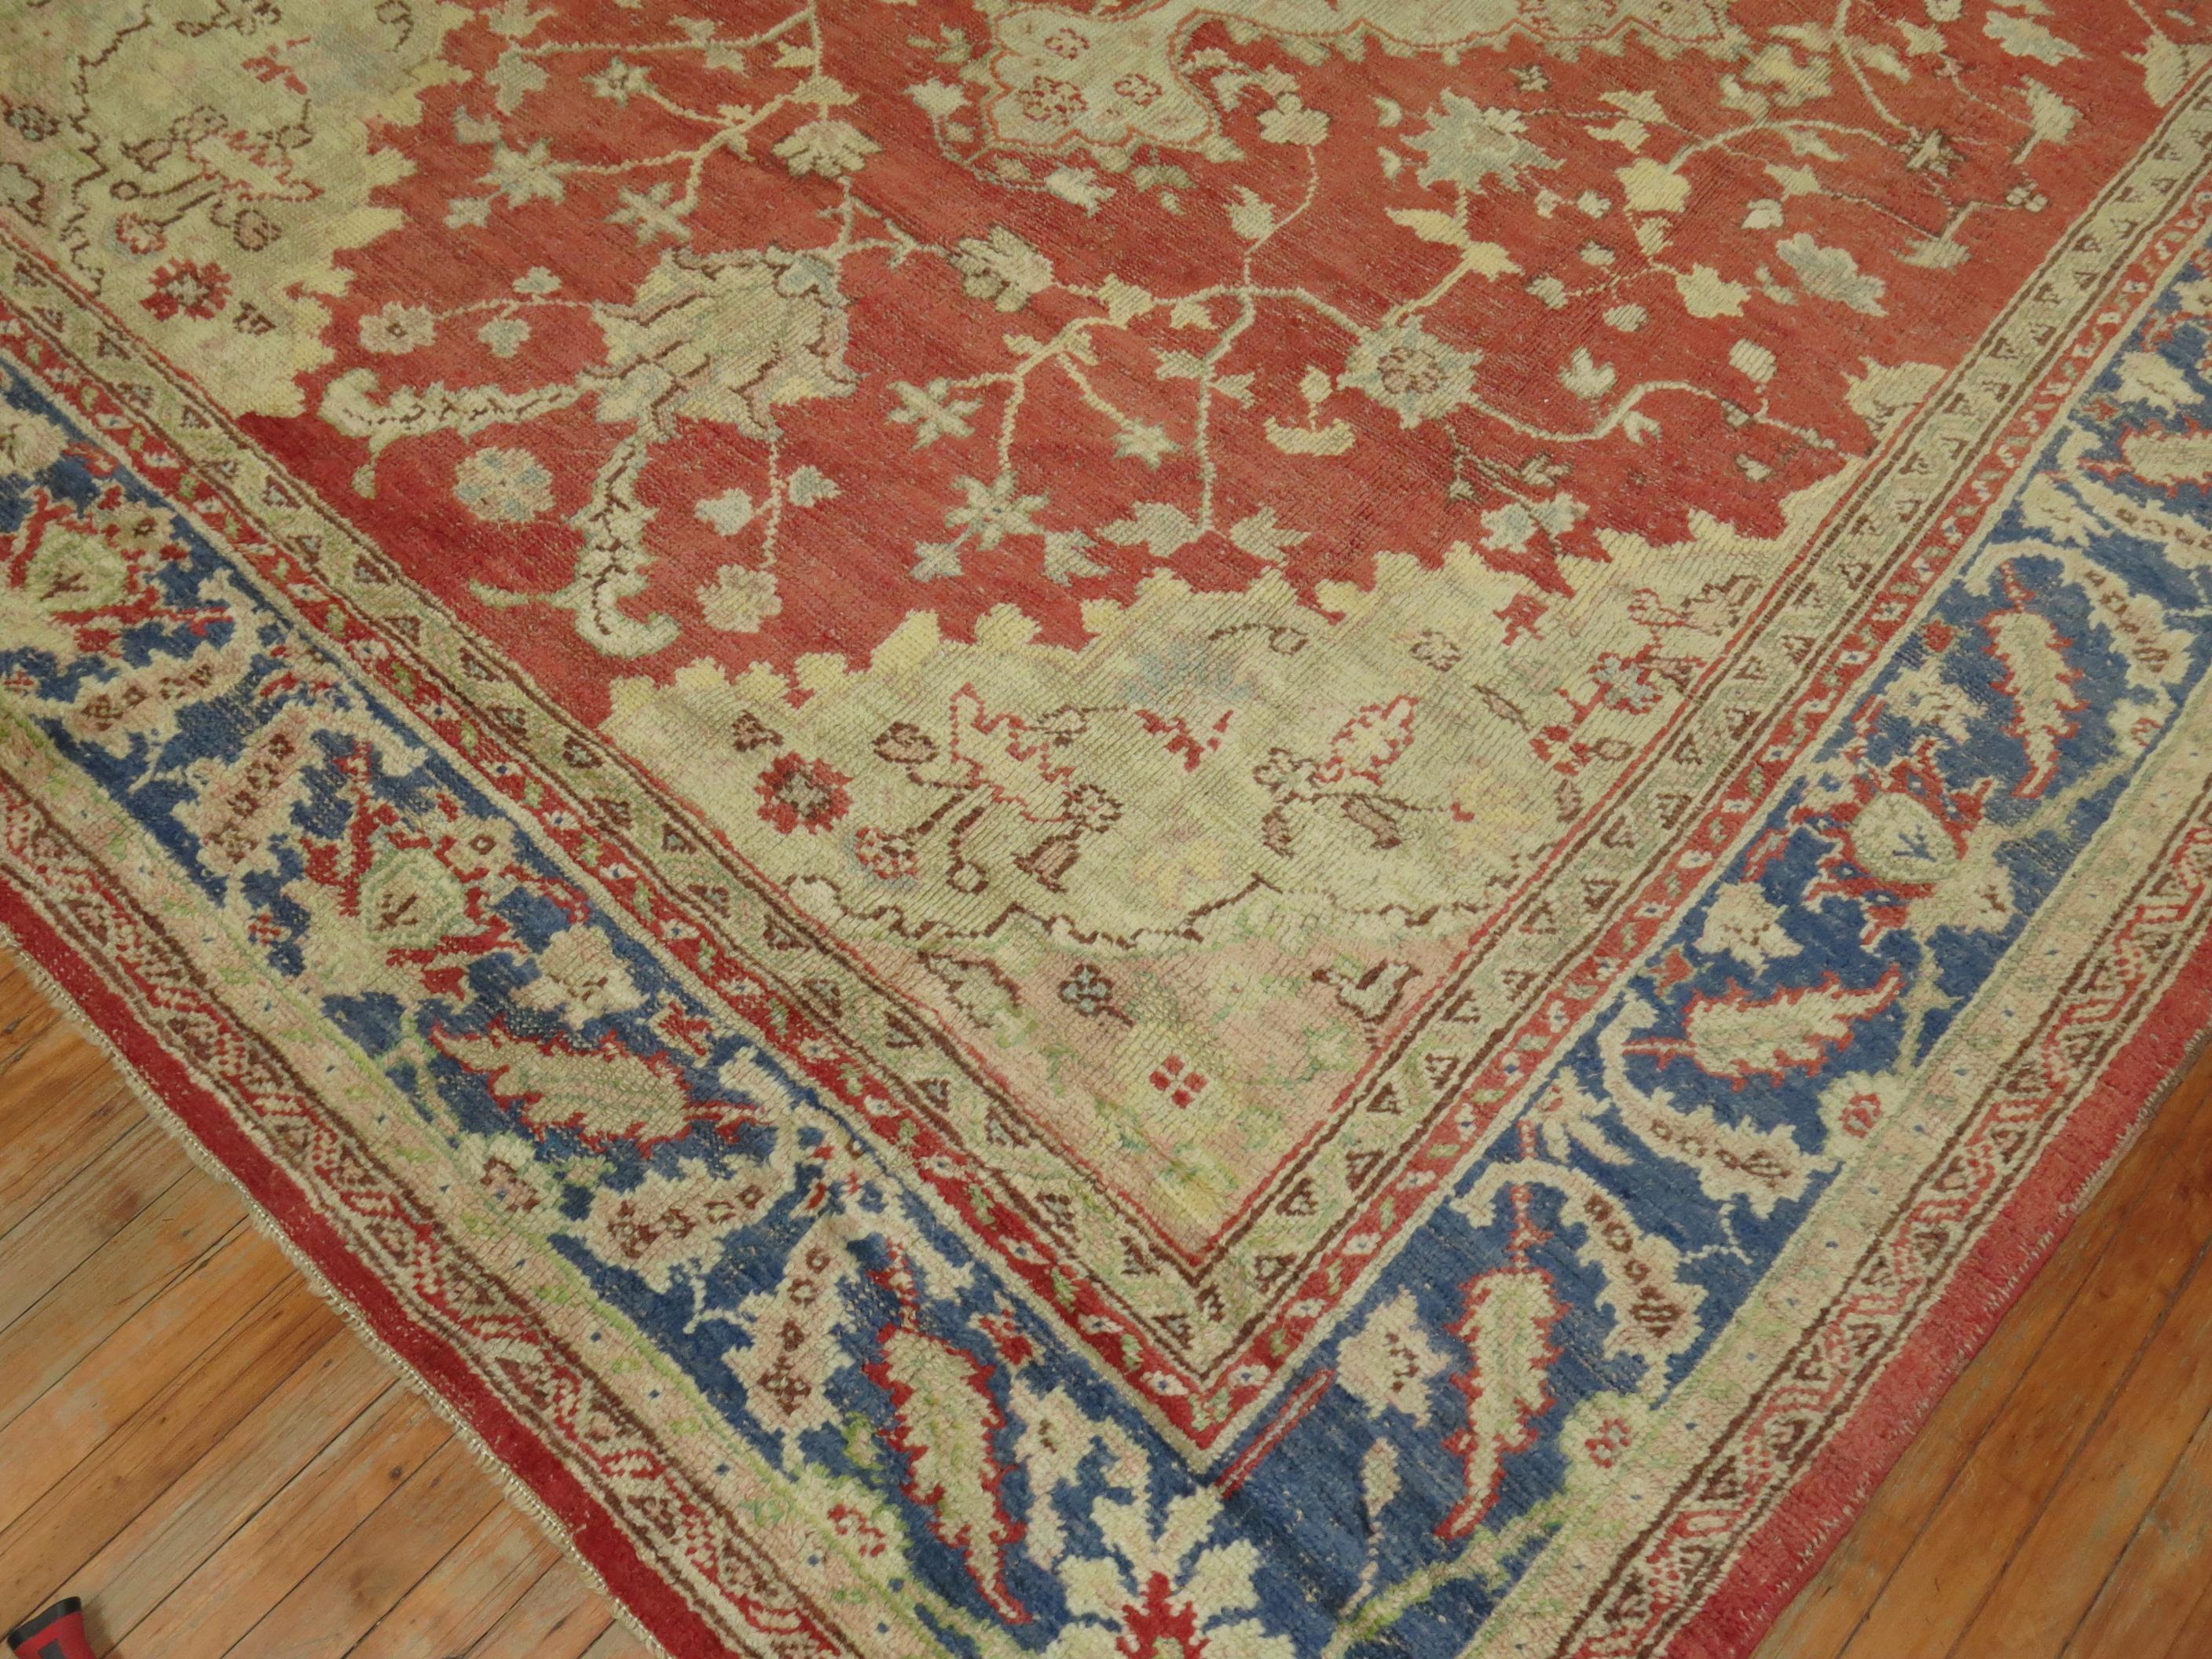 Early 20th Century Antique Oushak Rug 9' x 12' In Good Condition For Sale In New York, NY